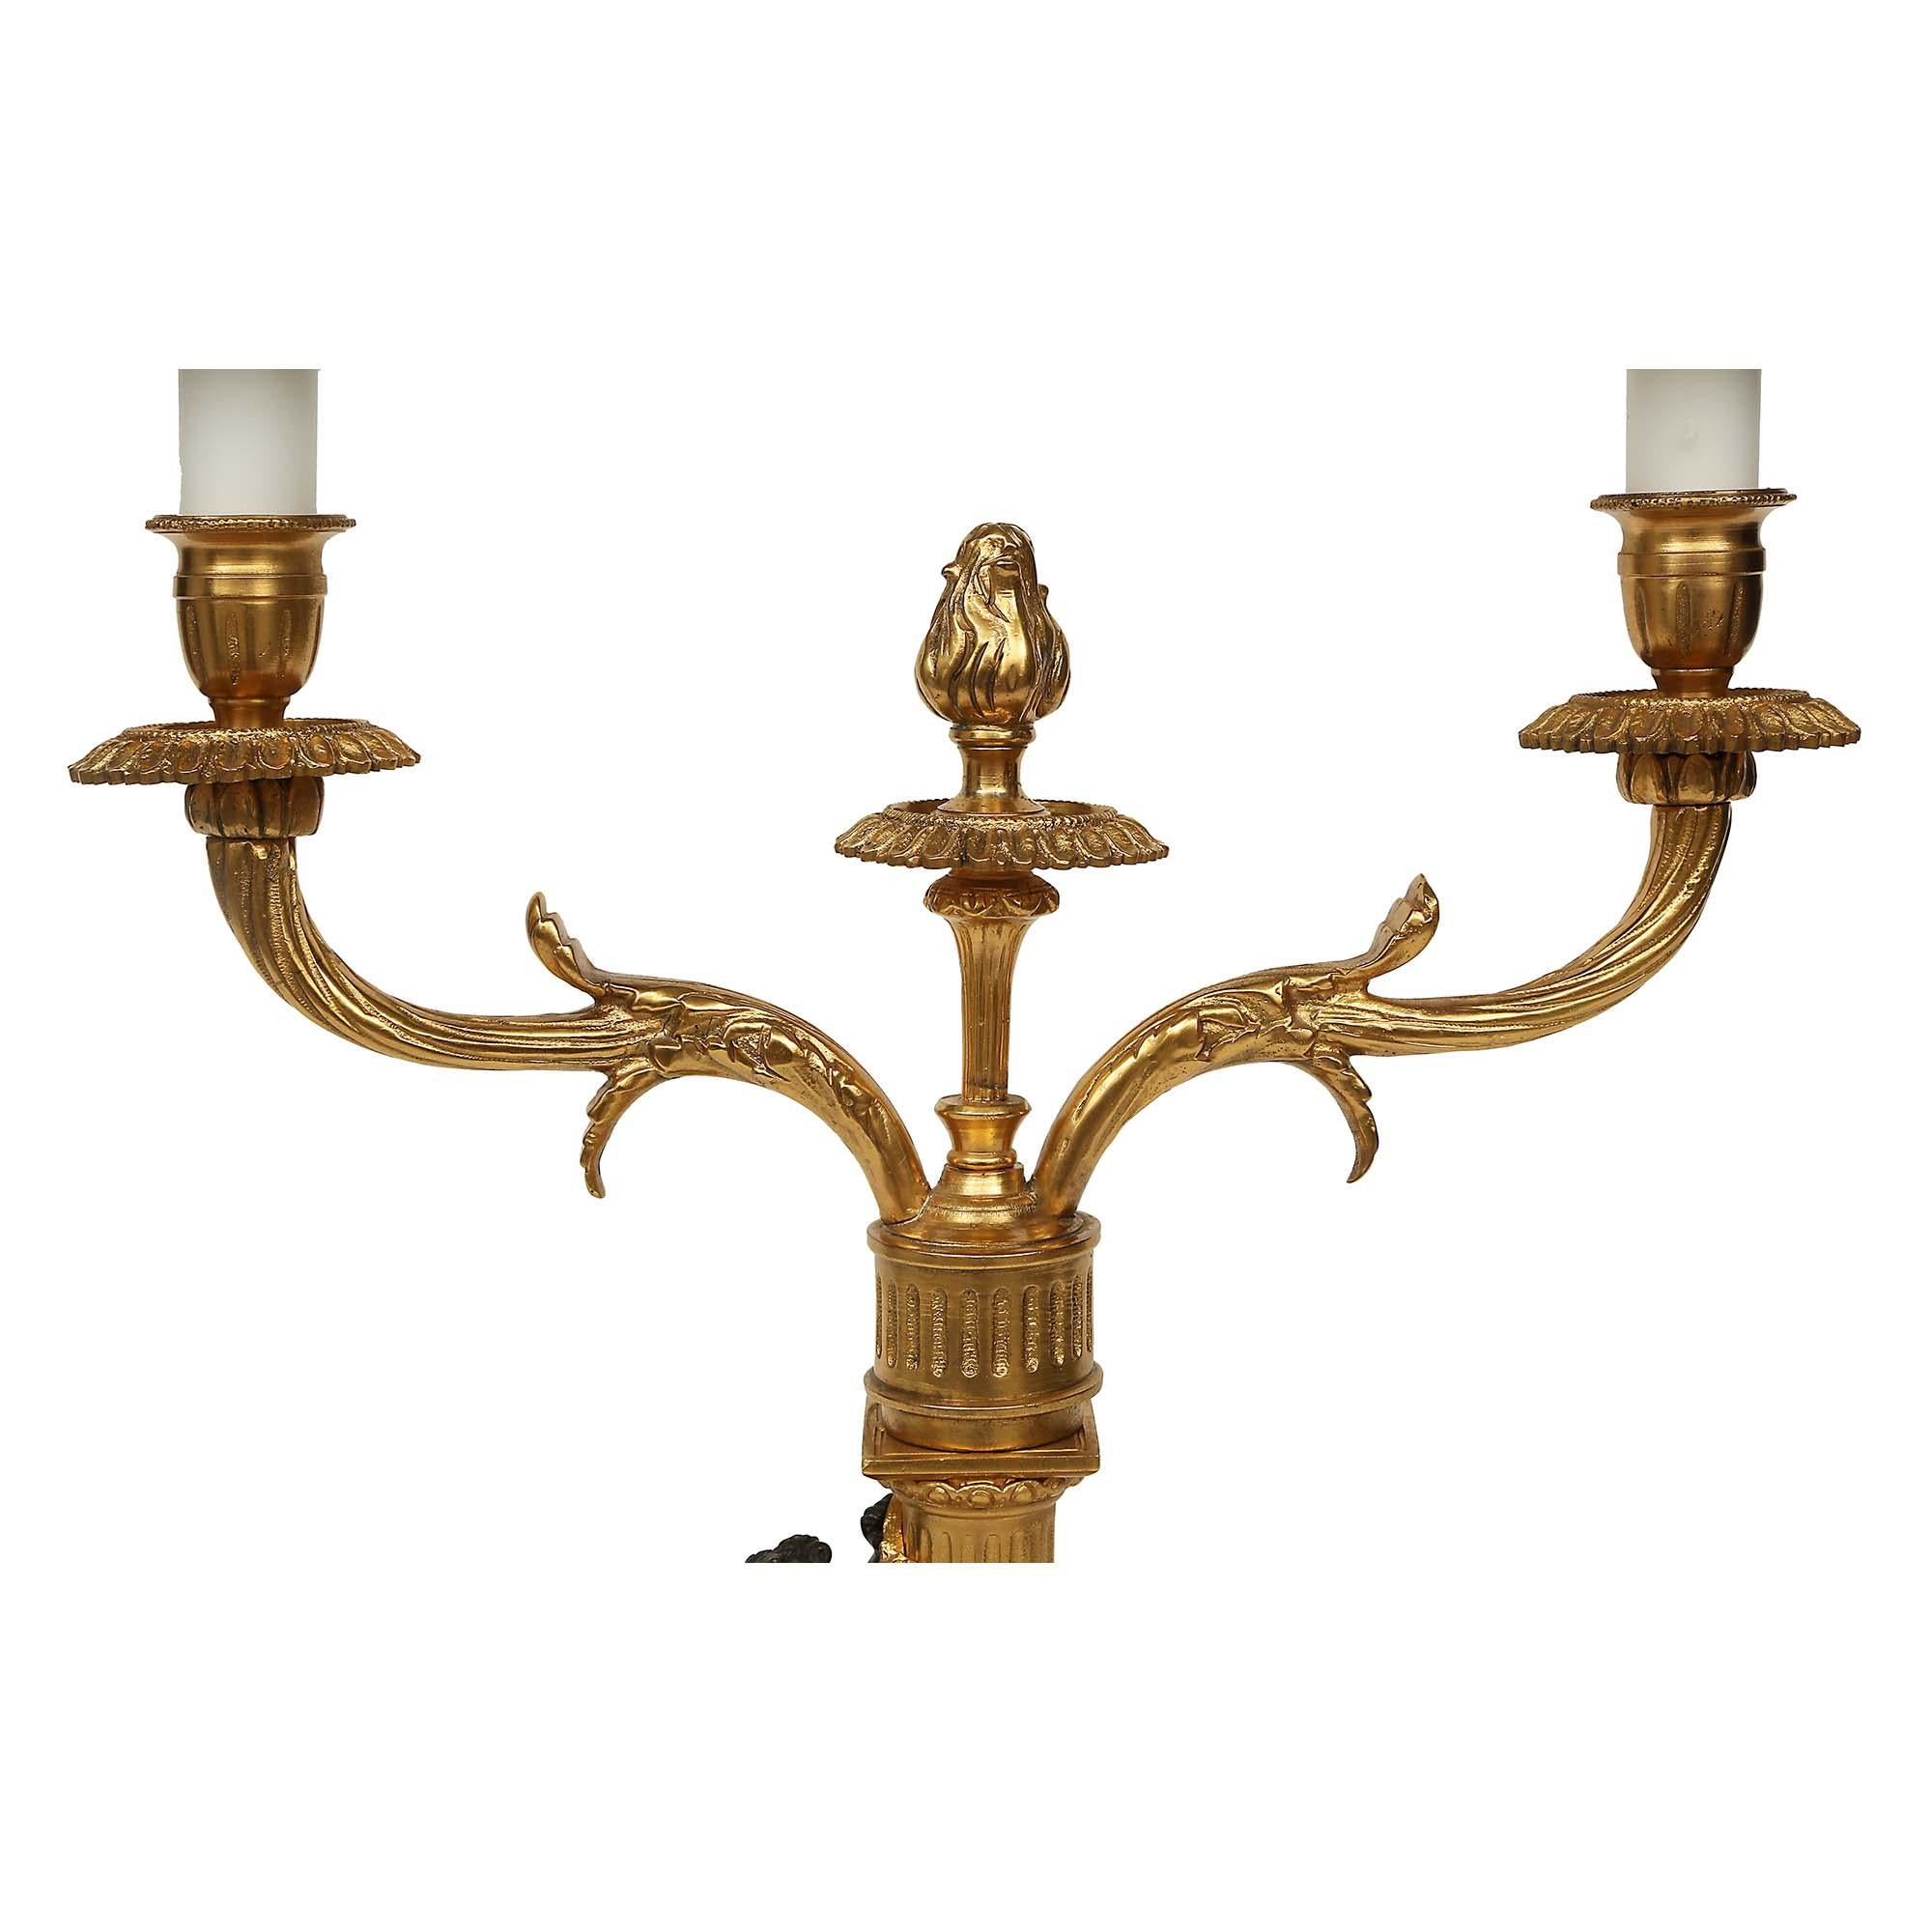 Ormolu  Pair of French Mid-19th Century Two-Arm Candelabras Mounted into Lamps For Sale